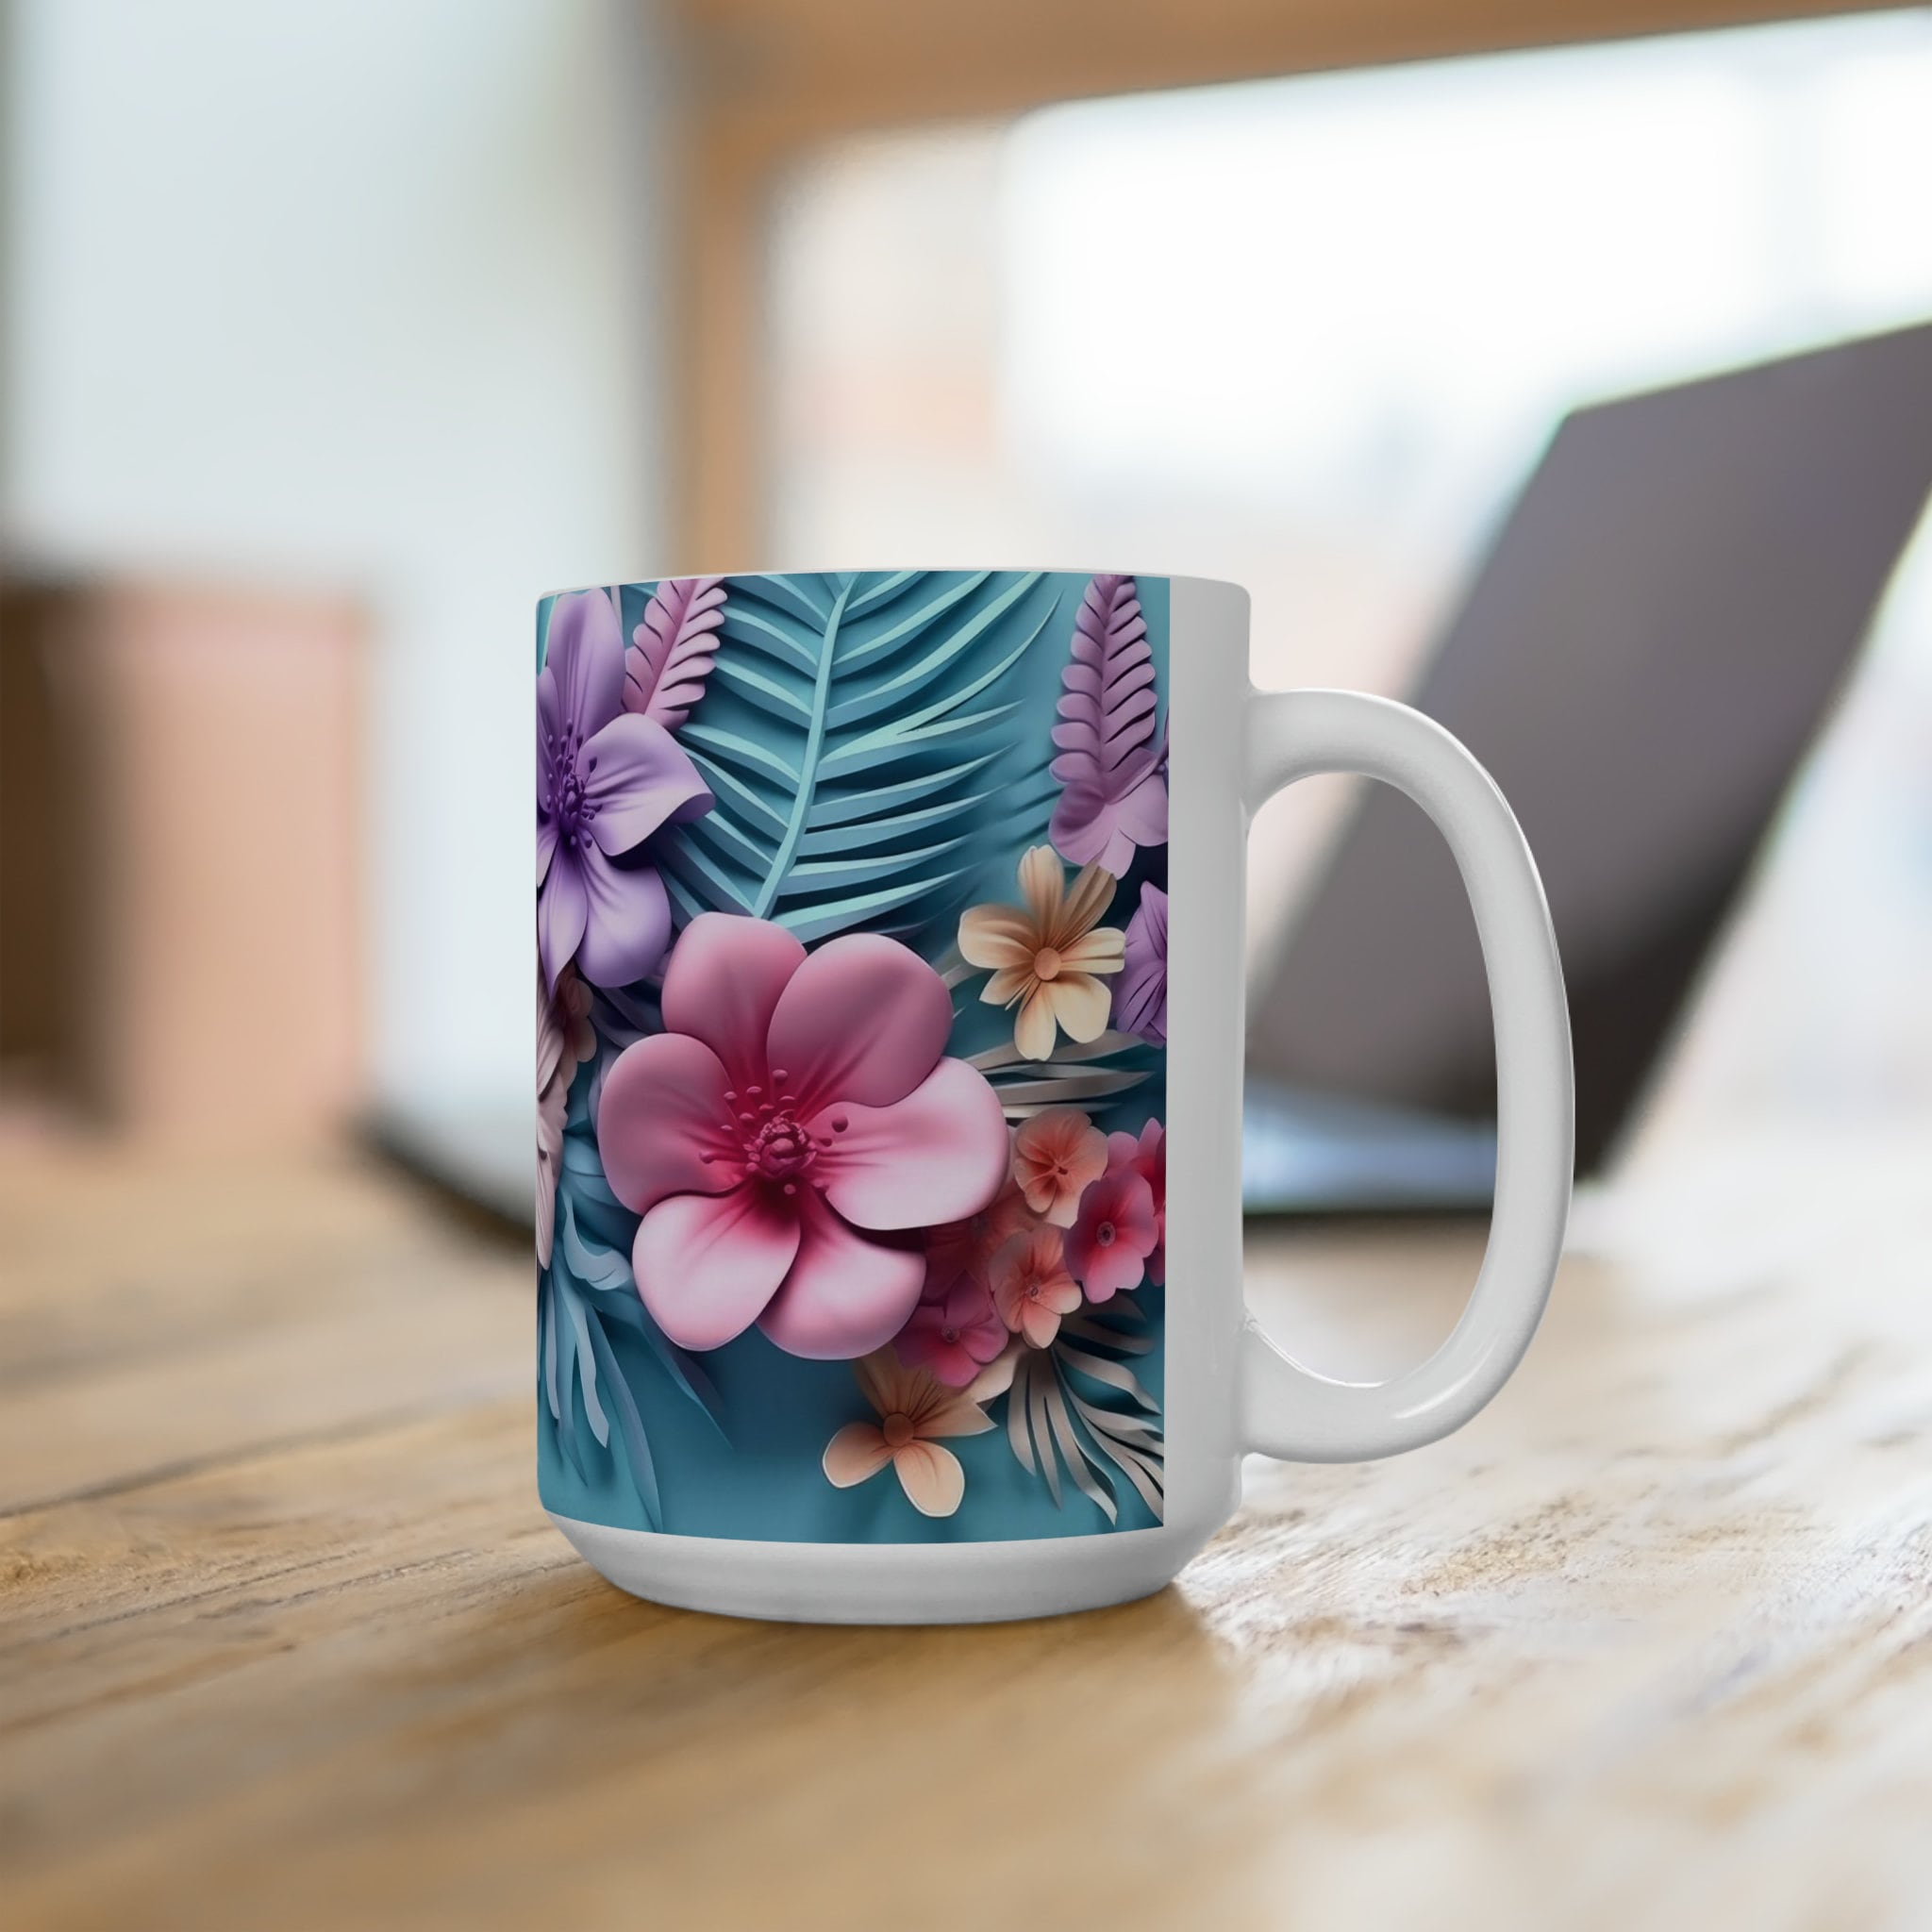 3D Artistic Beautiful Flowers on a White Ceramic Mug 15oz, Love and Friendship, Christmas Gift, Coworker Mug, Coffee Lover, Perfect Gift